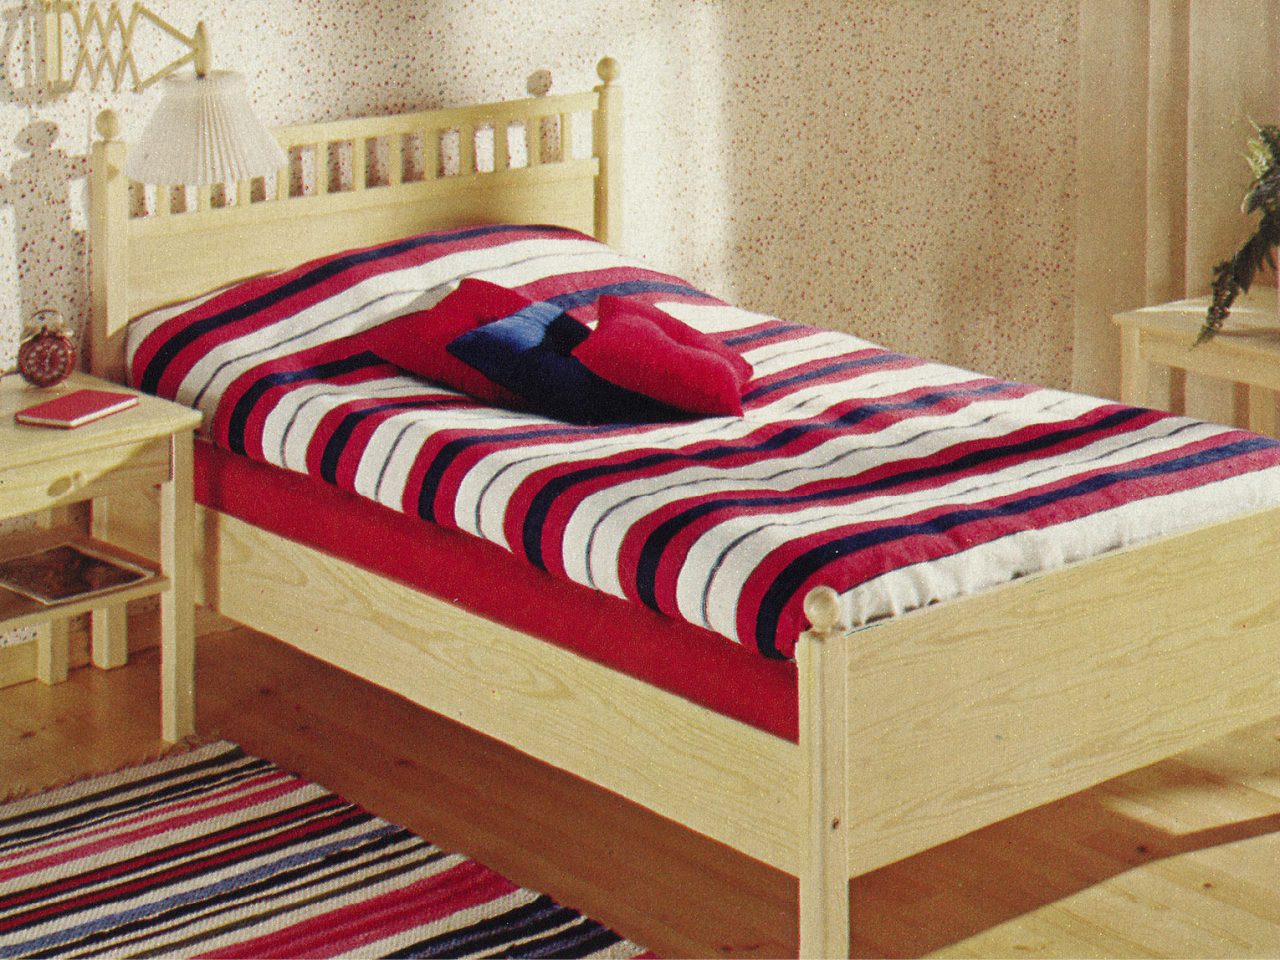 1977 IKEA catalogue image of a wooden bed with a red, black, and white bedspread and a striped rug on the floor.